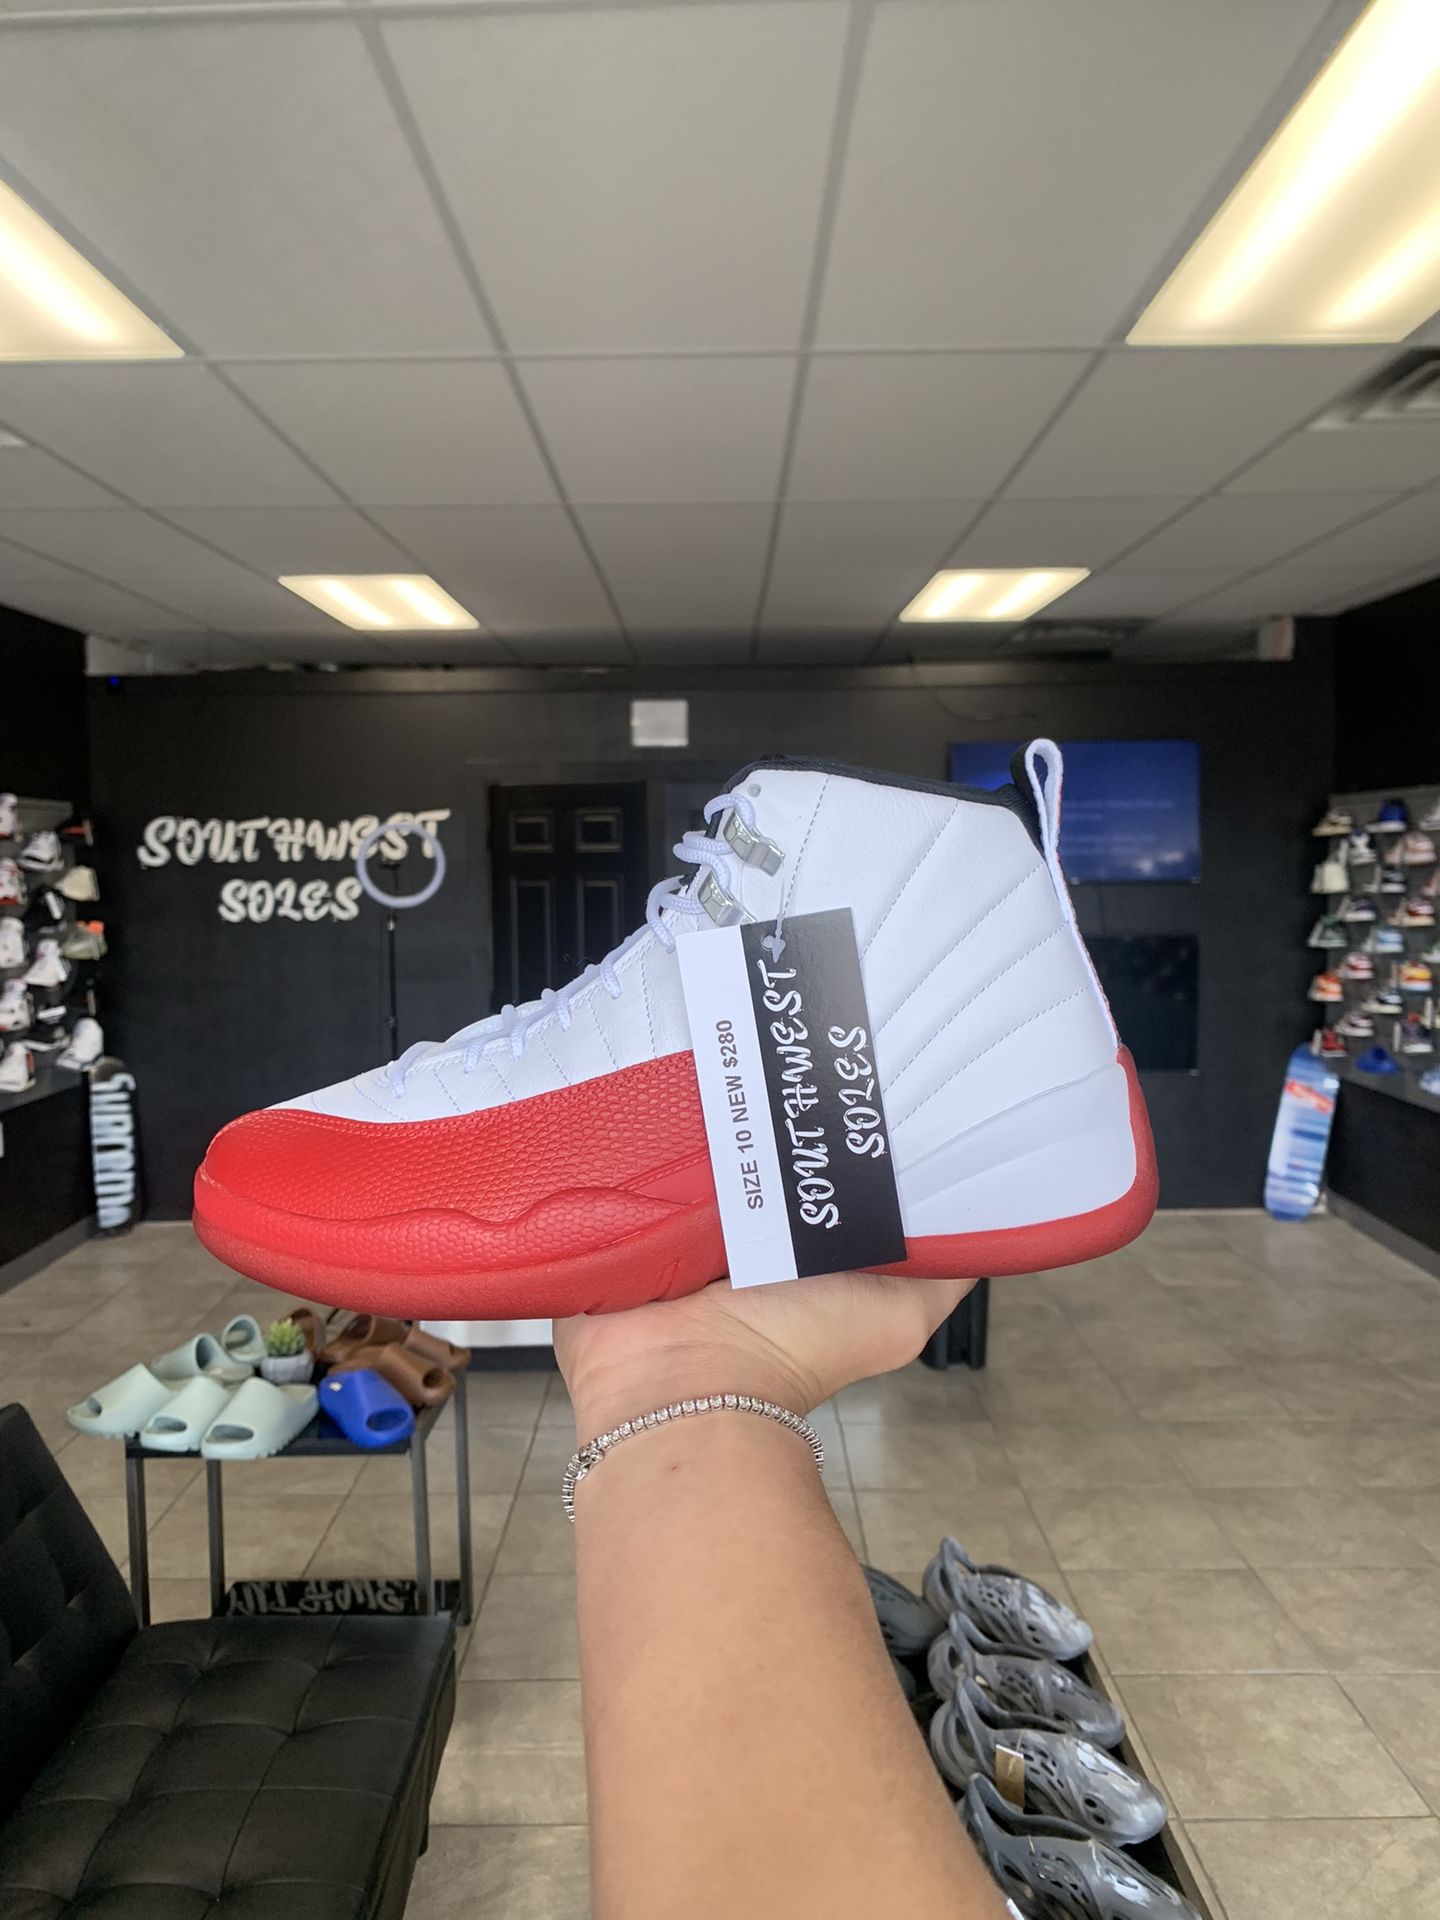 Jordan 12 Cherry Size 10 Available In Store!